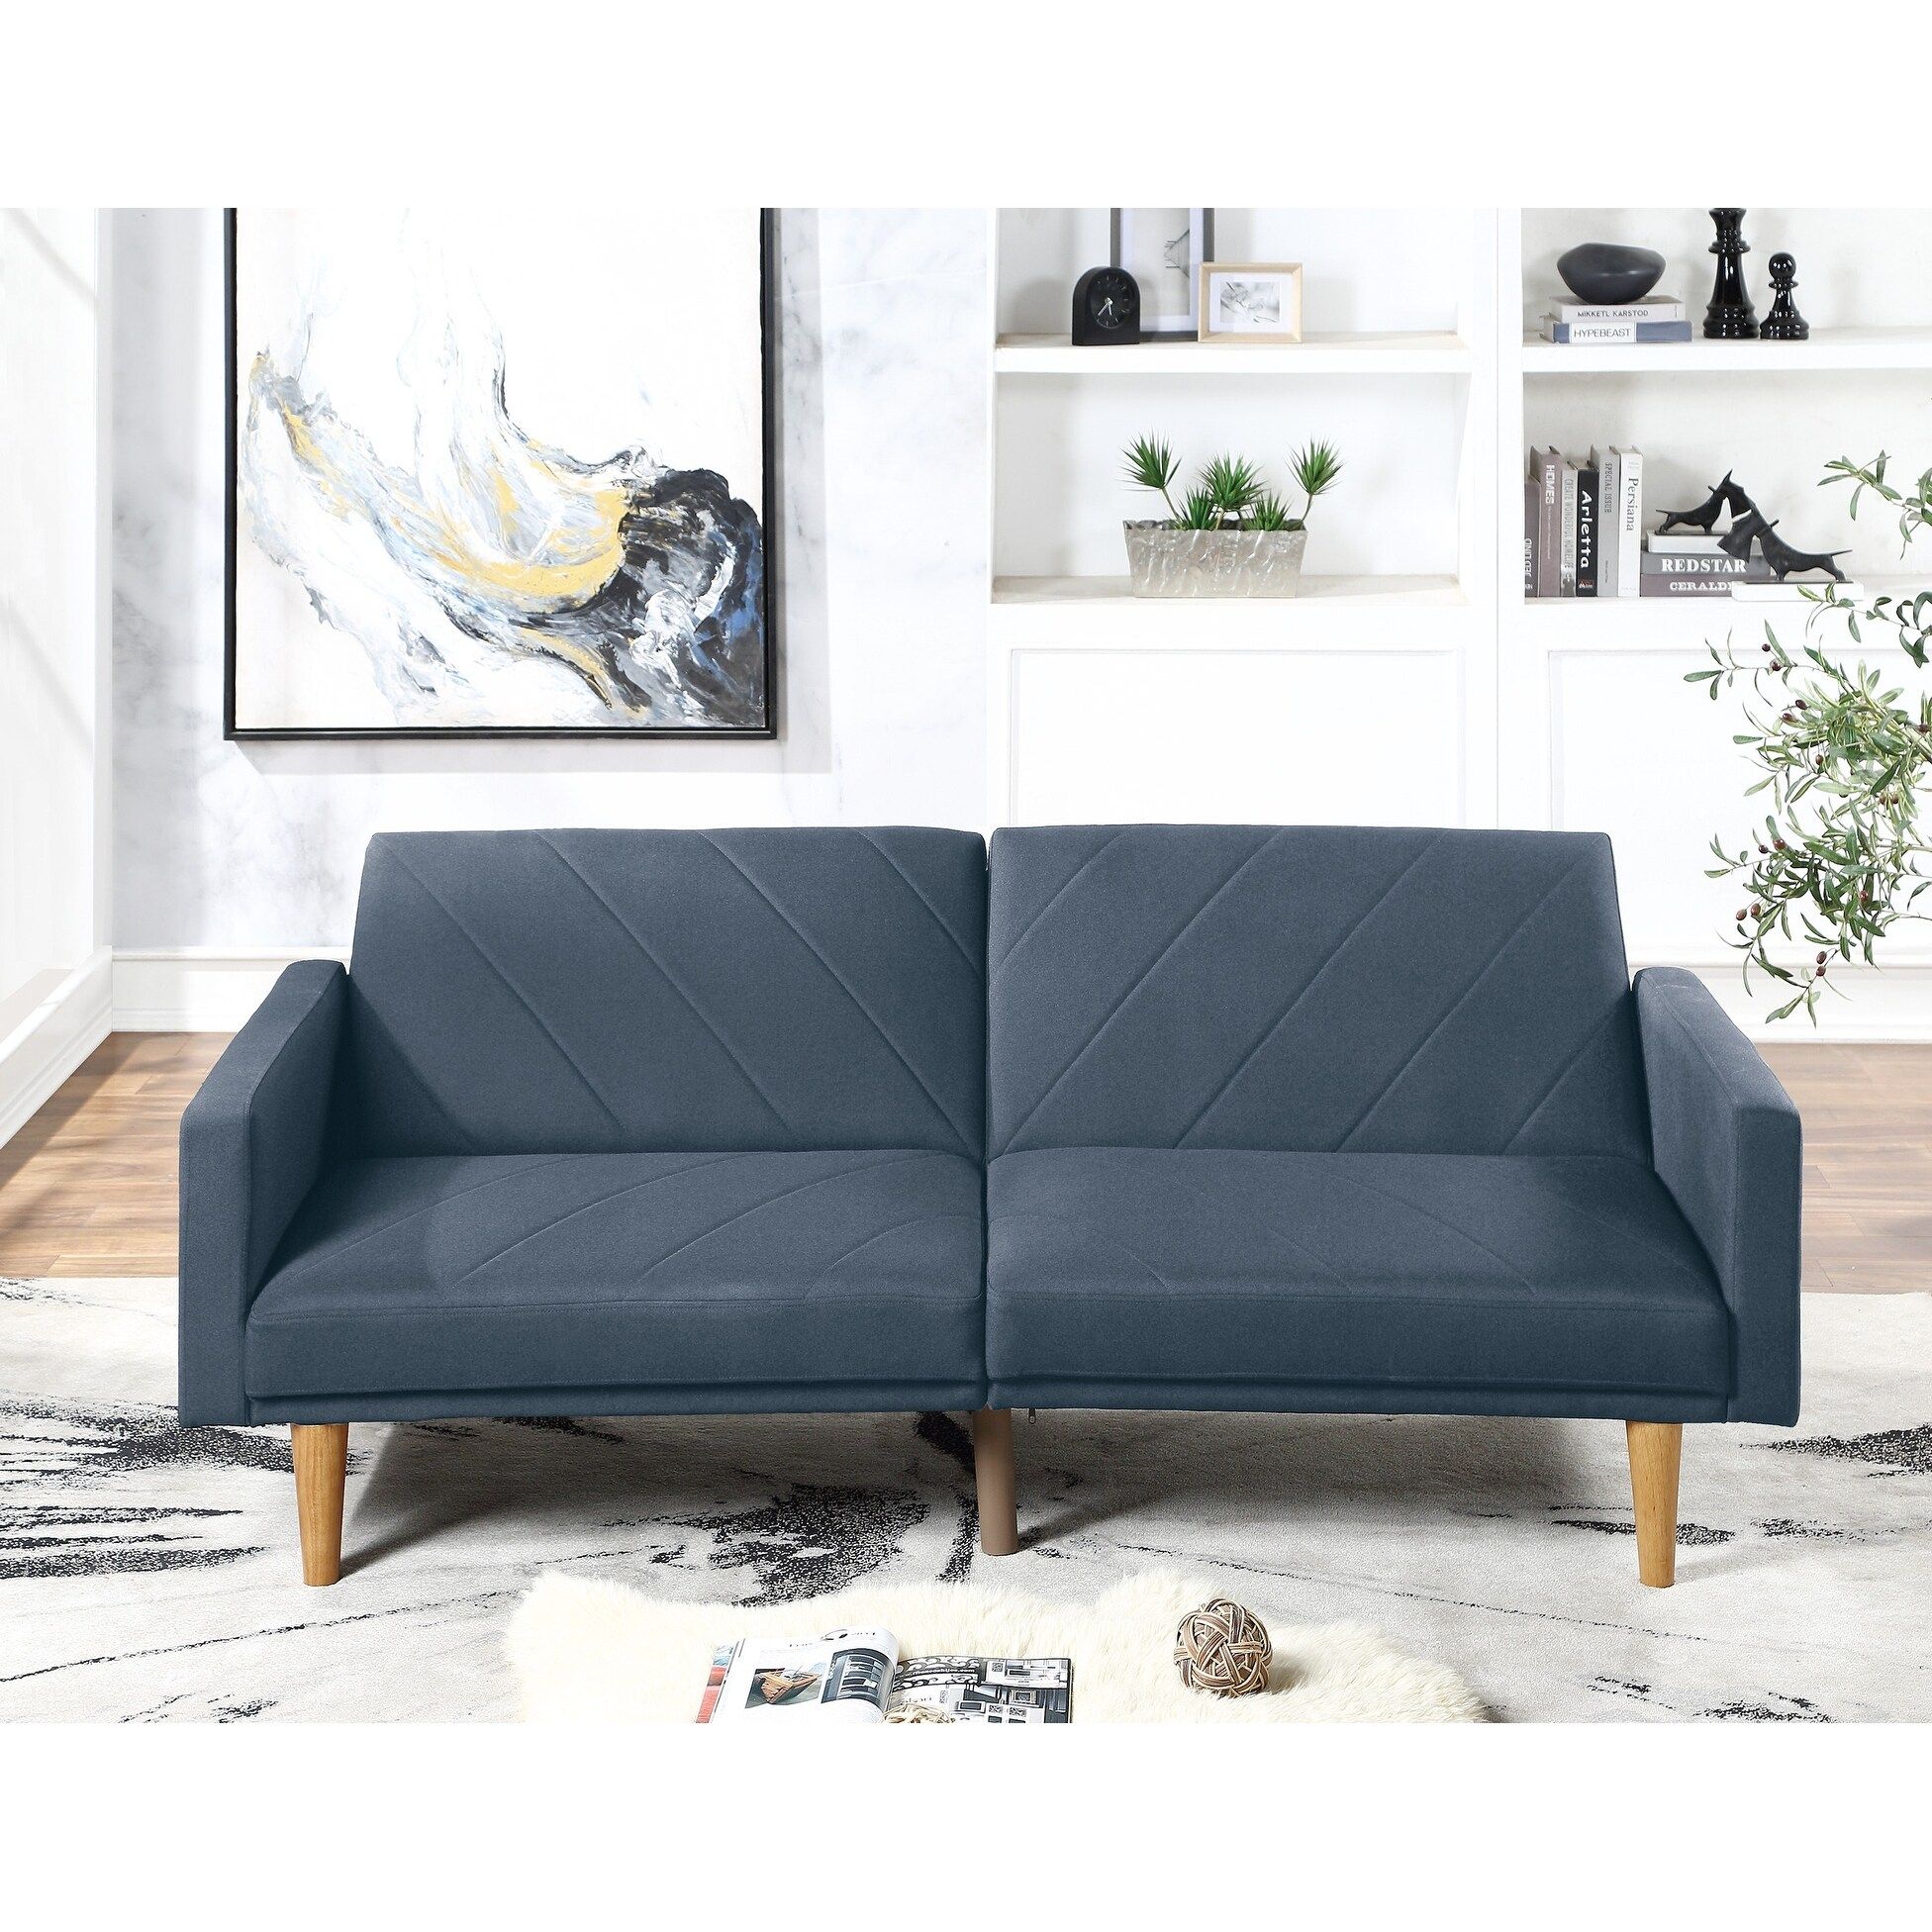 Modern Electric Look 1Pc Convertible Sofa Couch Navy Color Linen Like  Fabric Cushion Wooden Legs Living Room – Bed Bath & Beyond – 35204646 Inside Navy Sleeper Sofa Couches (Photo 3 of 15)